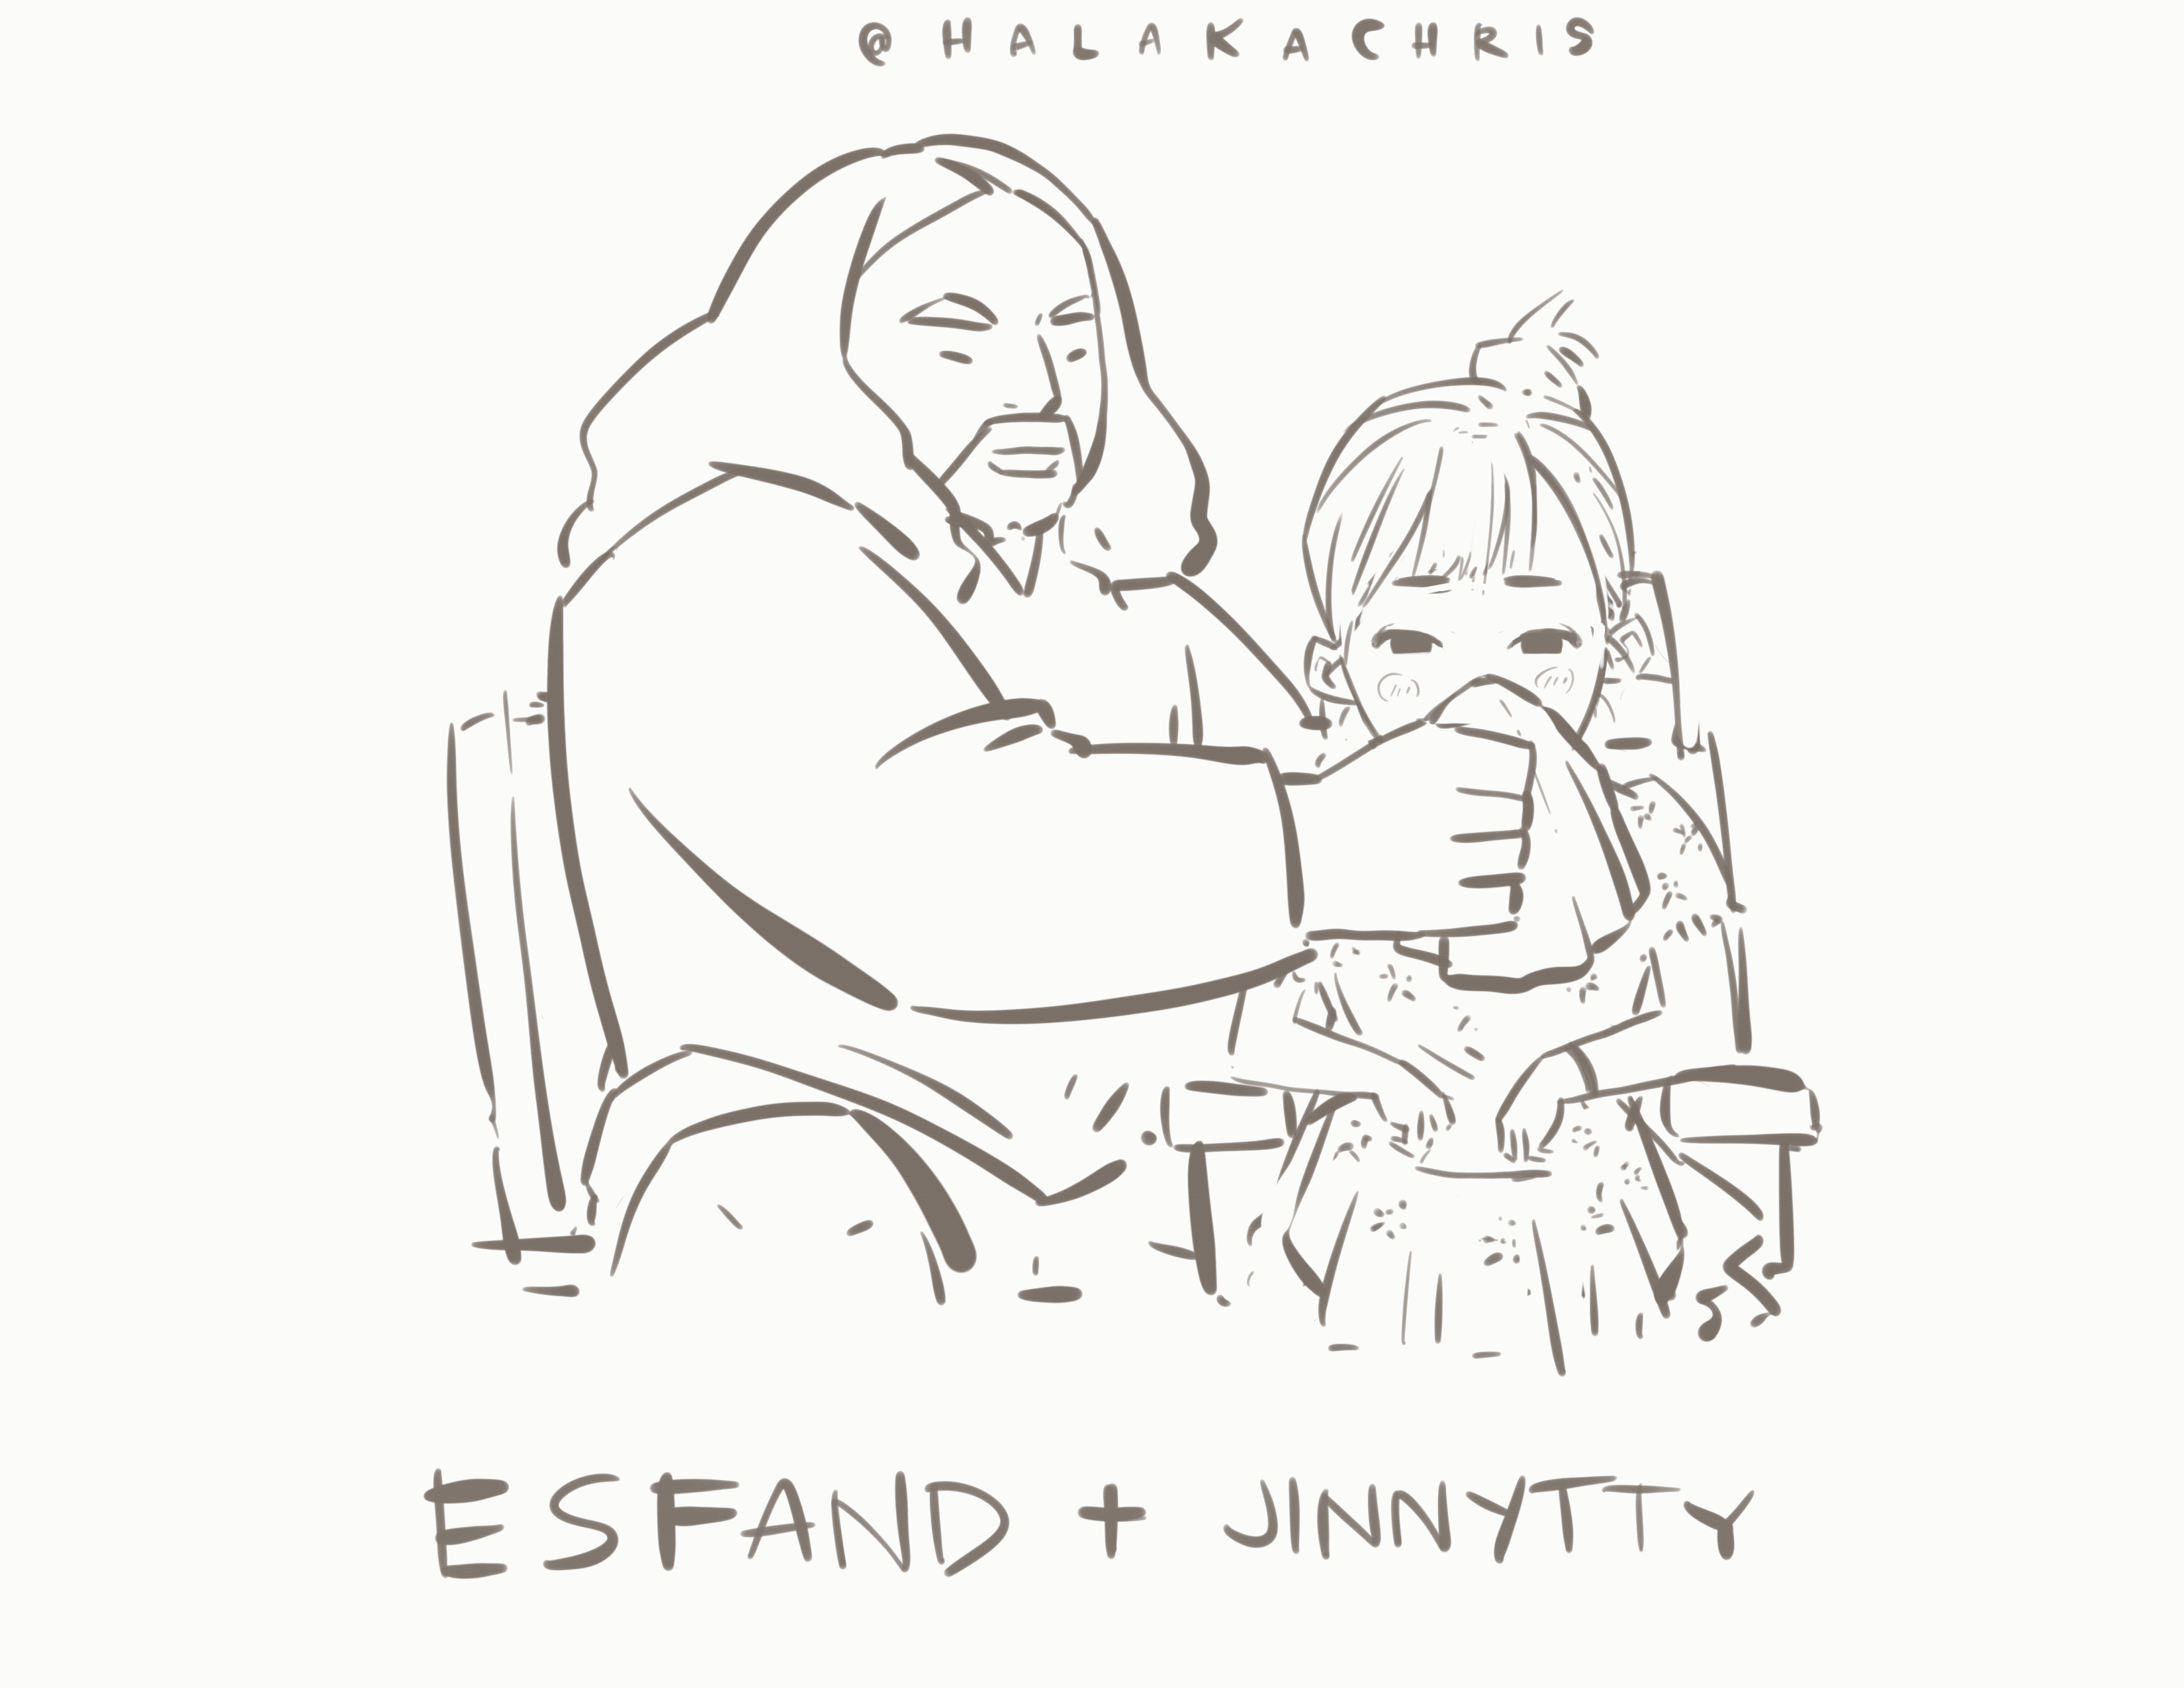 Esfand-oppa taking care of his stepsister